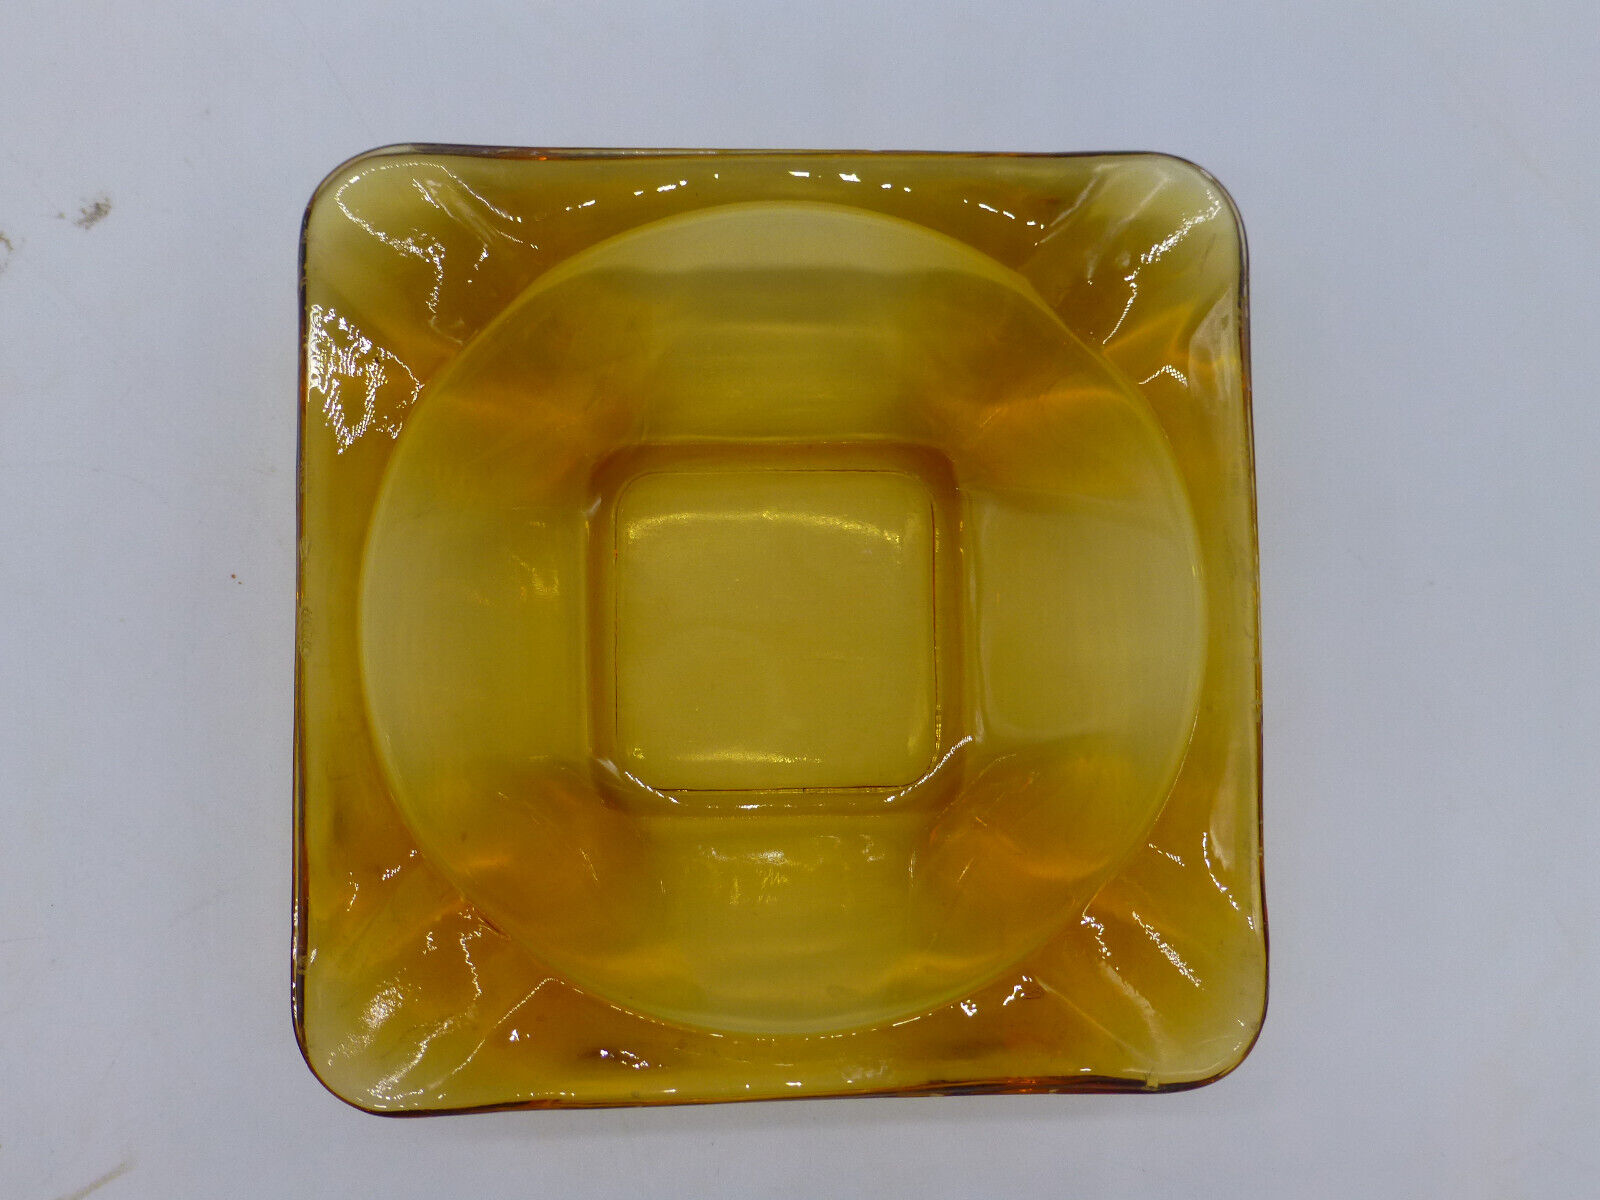 Vintage Amber Glass Square Ashtray 4.5 x 4.5” Unmarked in EUC